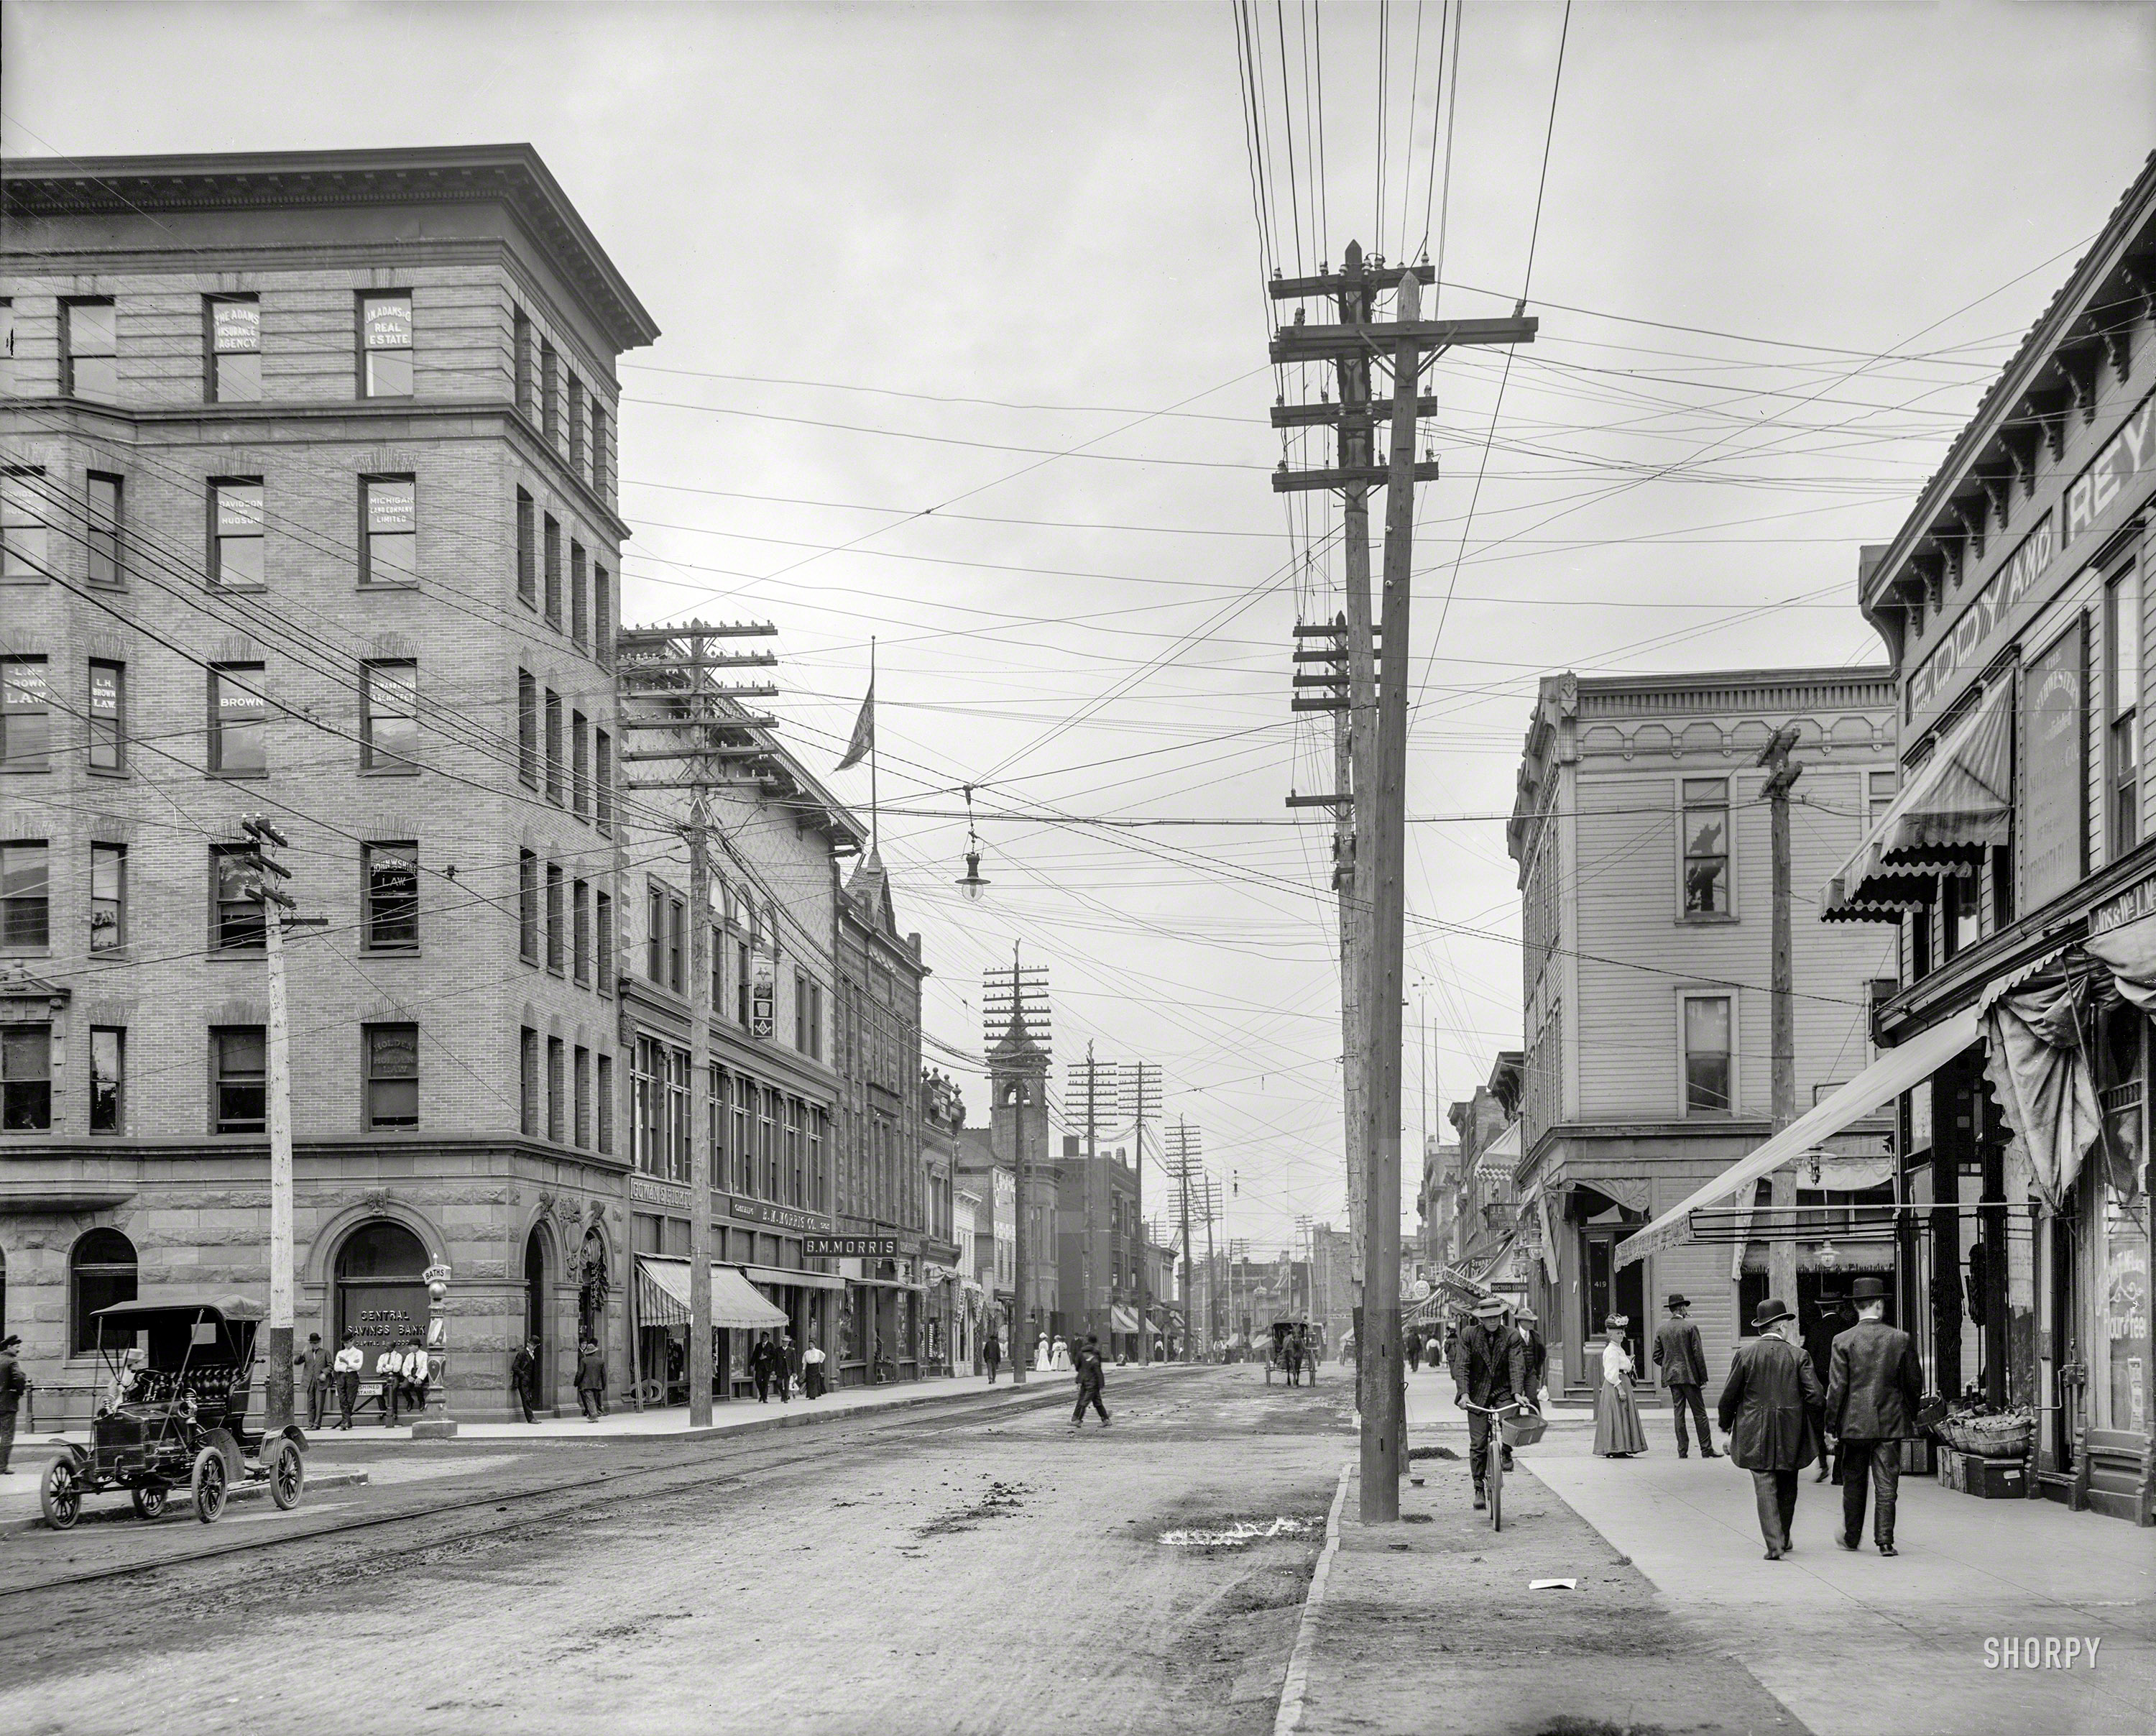 Circa 1908. "Ashmun Street, Sault Sainte Marie, Michigan." A bustling business district whose transport options include auto, streetcar, bicycle, horse and your own two feet. 8x10 inch glass negative, Detroit Publishing Co. View full size.